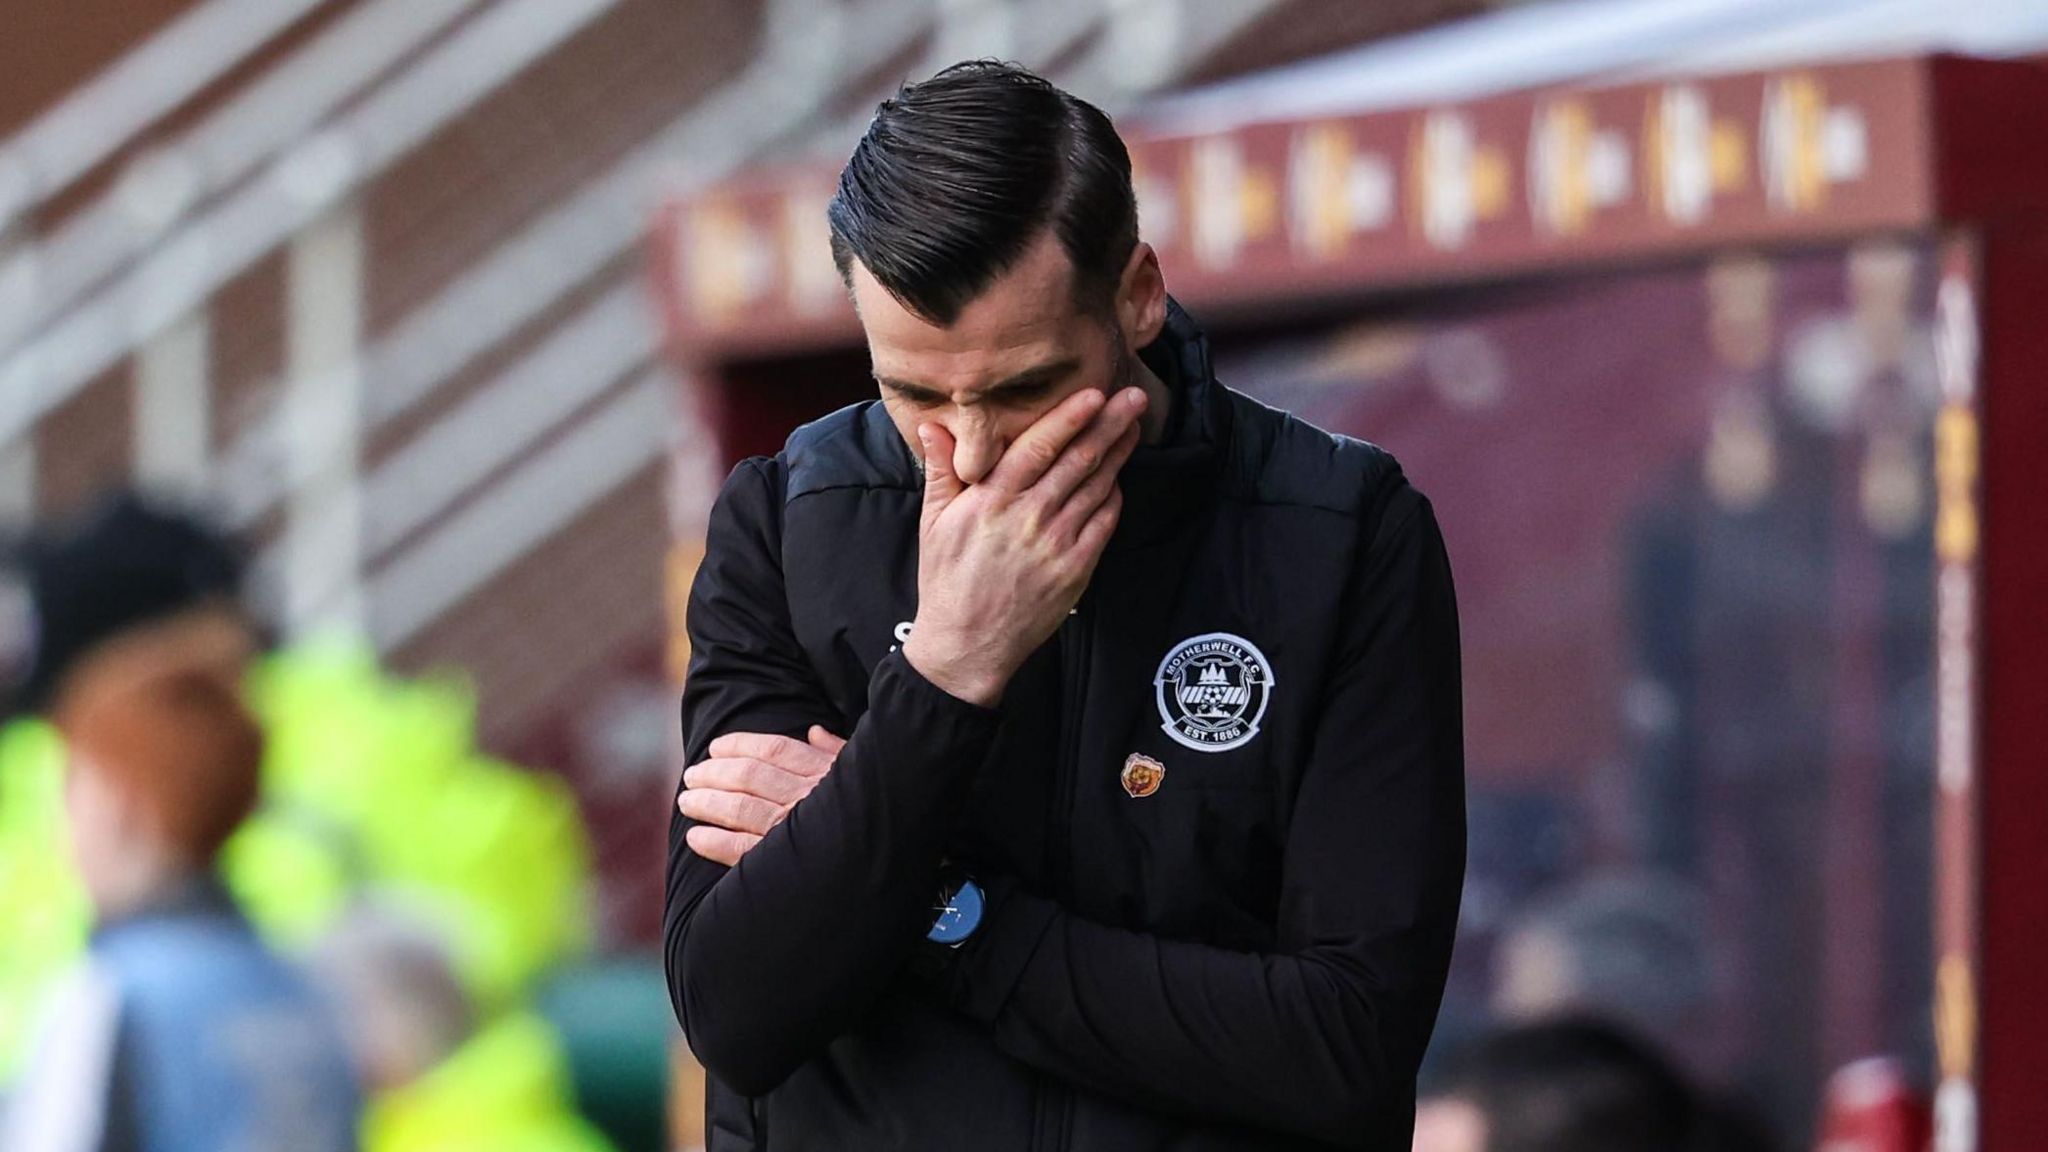 Motherwell are facing a huge set back ahead of their game vs Hibernian